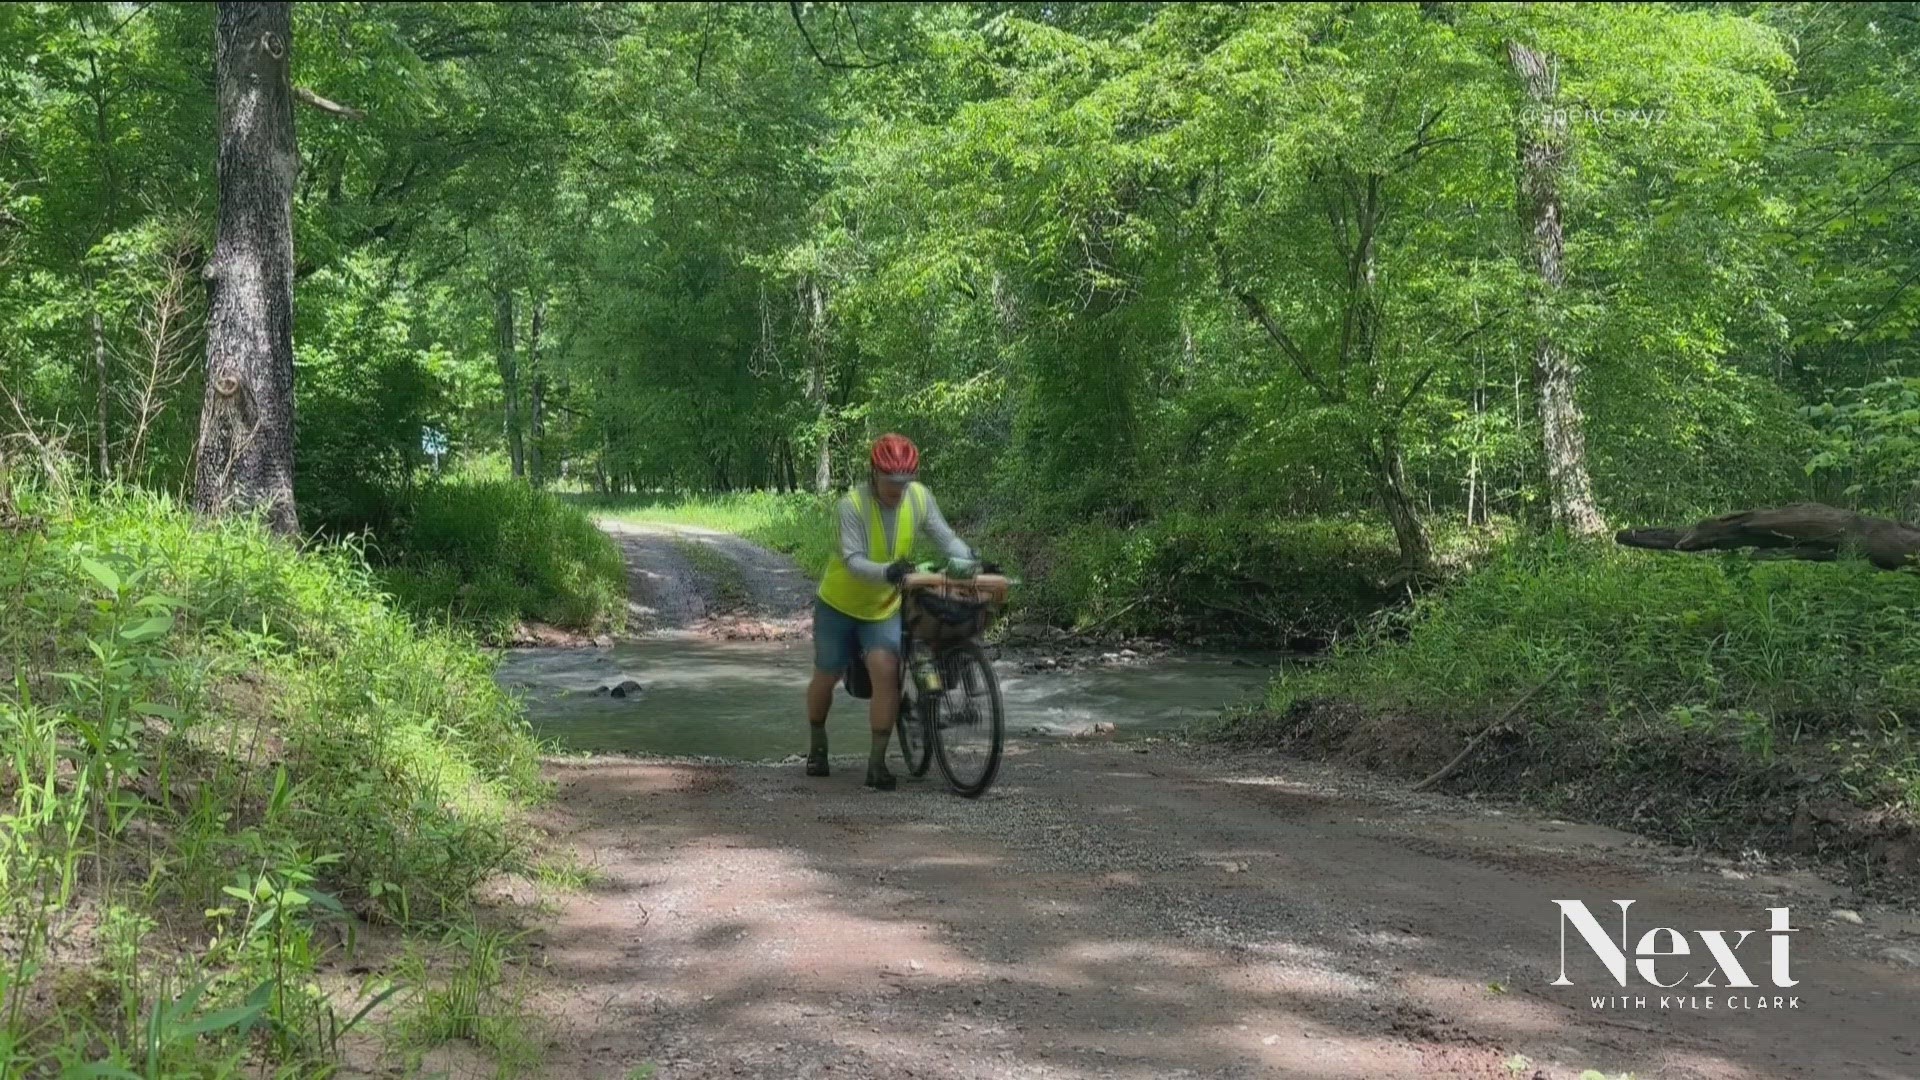 The cyclist has biked 12,000 miles so far and has about 6,000 more to go.